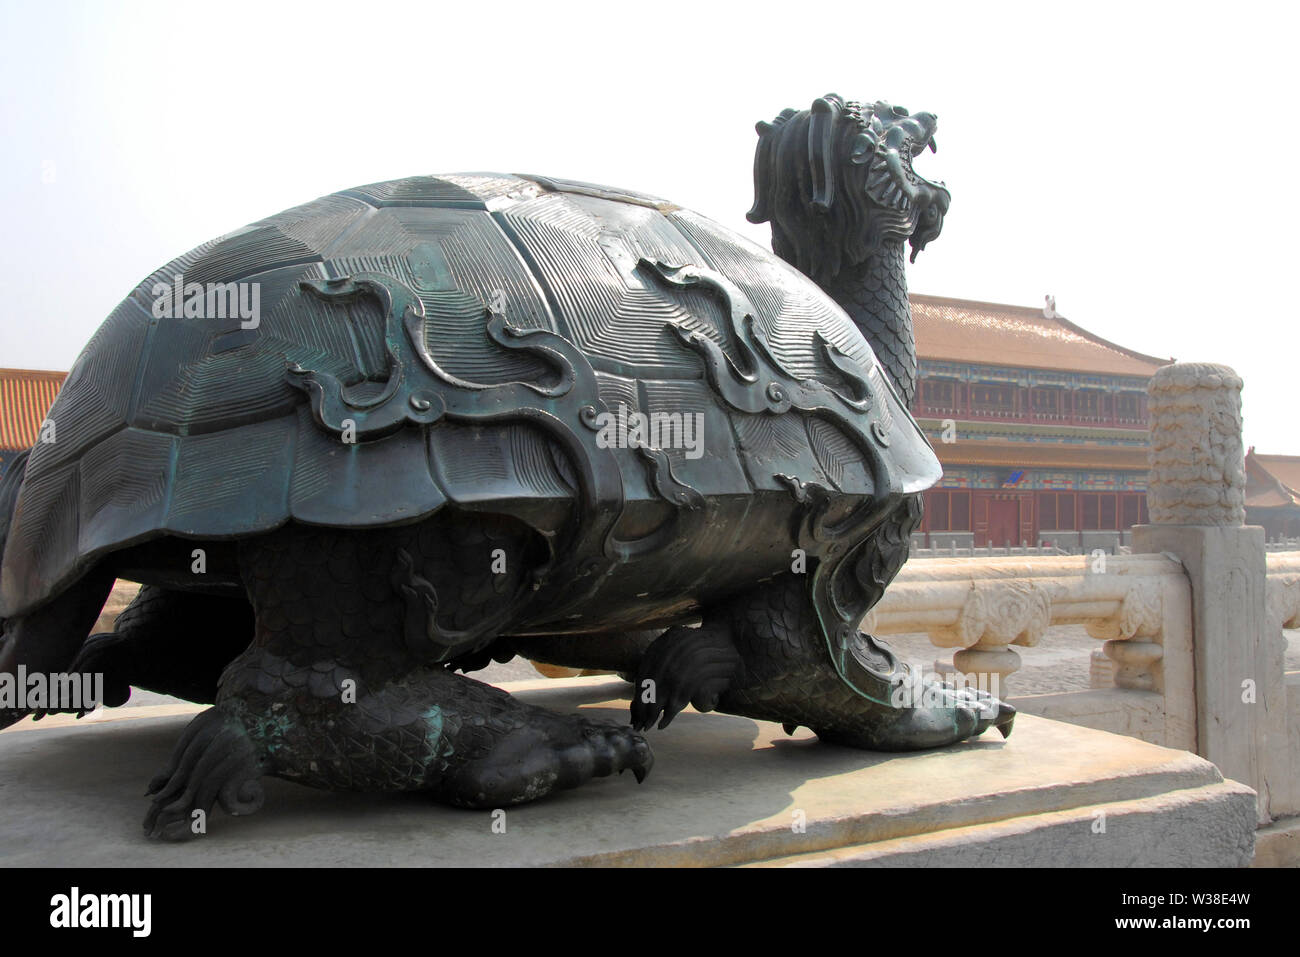 Forbidden City, Beijing, China. Bronze statue of a turtle inside the Forbidden City. The Forbidden City has traditional Chinese architecture. UNESCO. Stock Photo